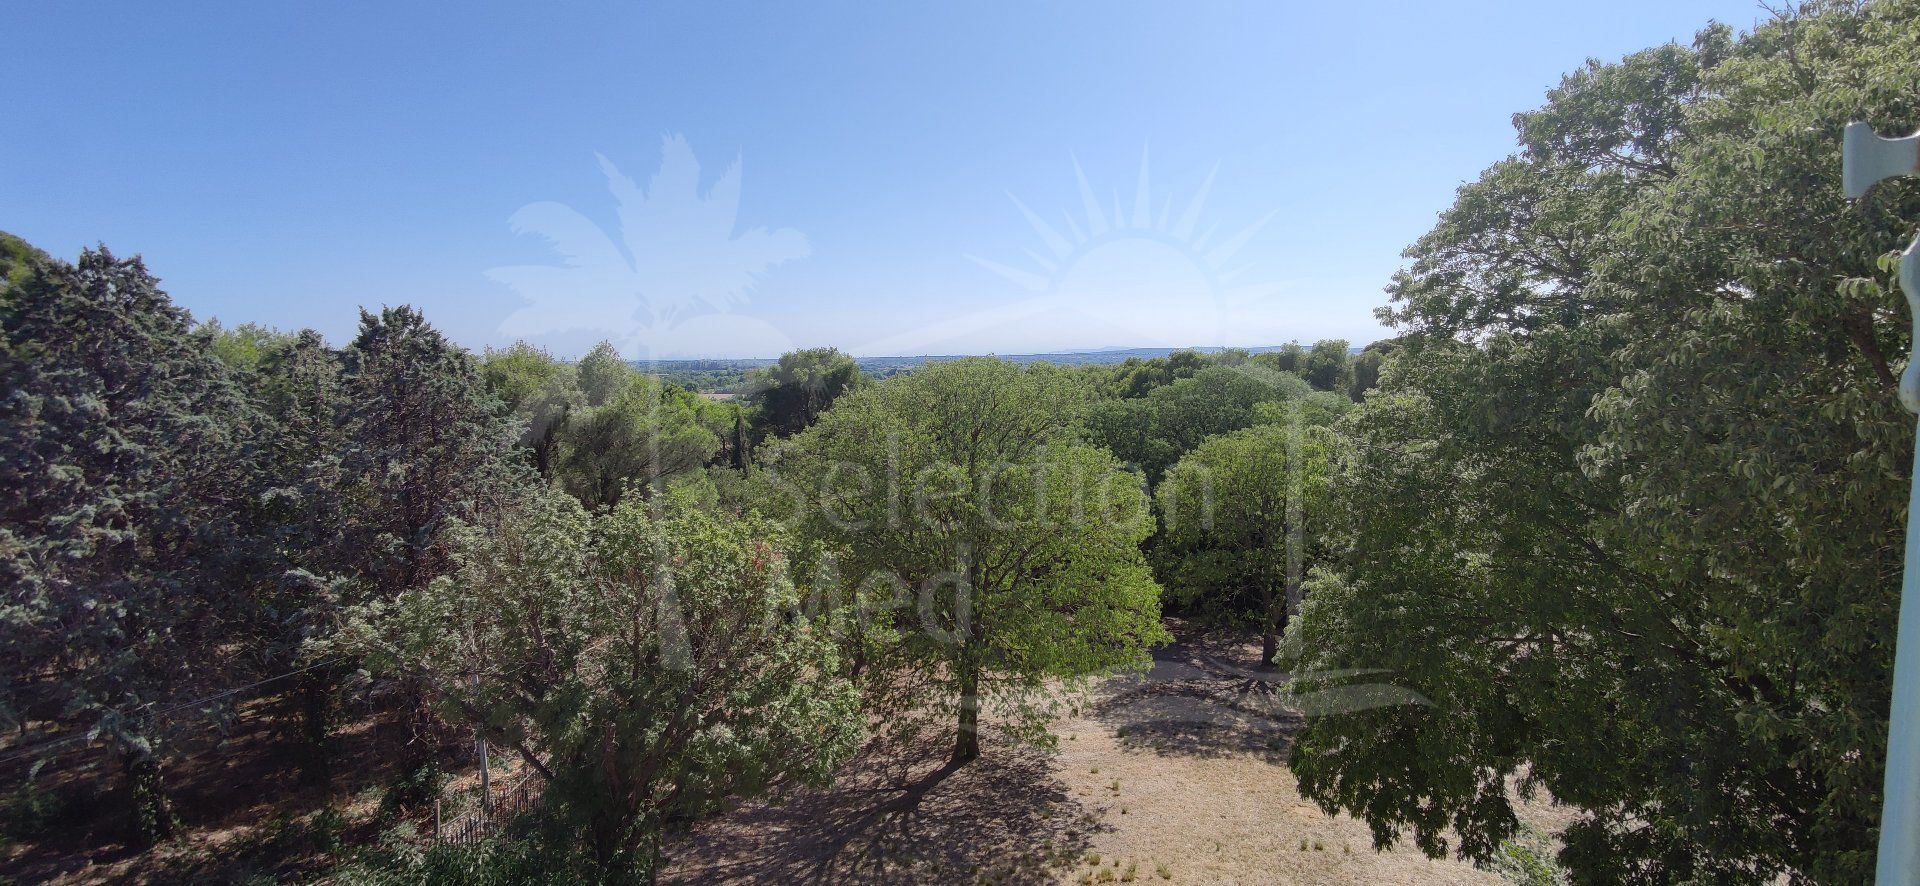 Exceptional mansion with 17 ha park, 500m2 of living space, 350m2 outbuilding, protected area in organic vineyards, close to amenities, 5 km from Béziers, superb view, great deal.